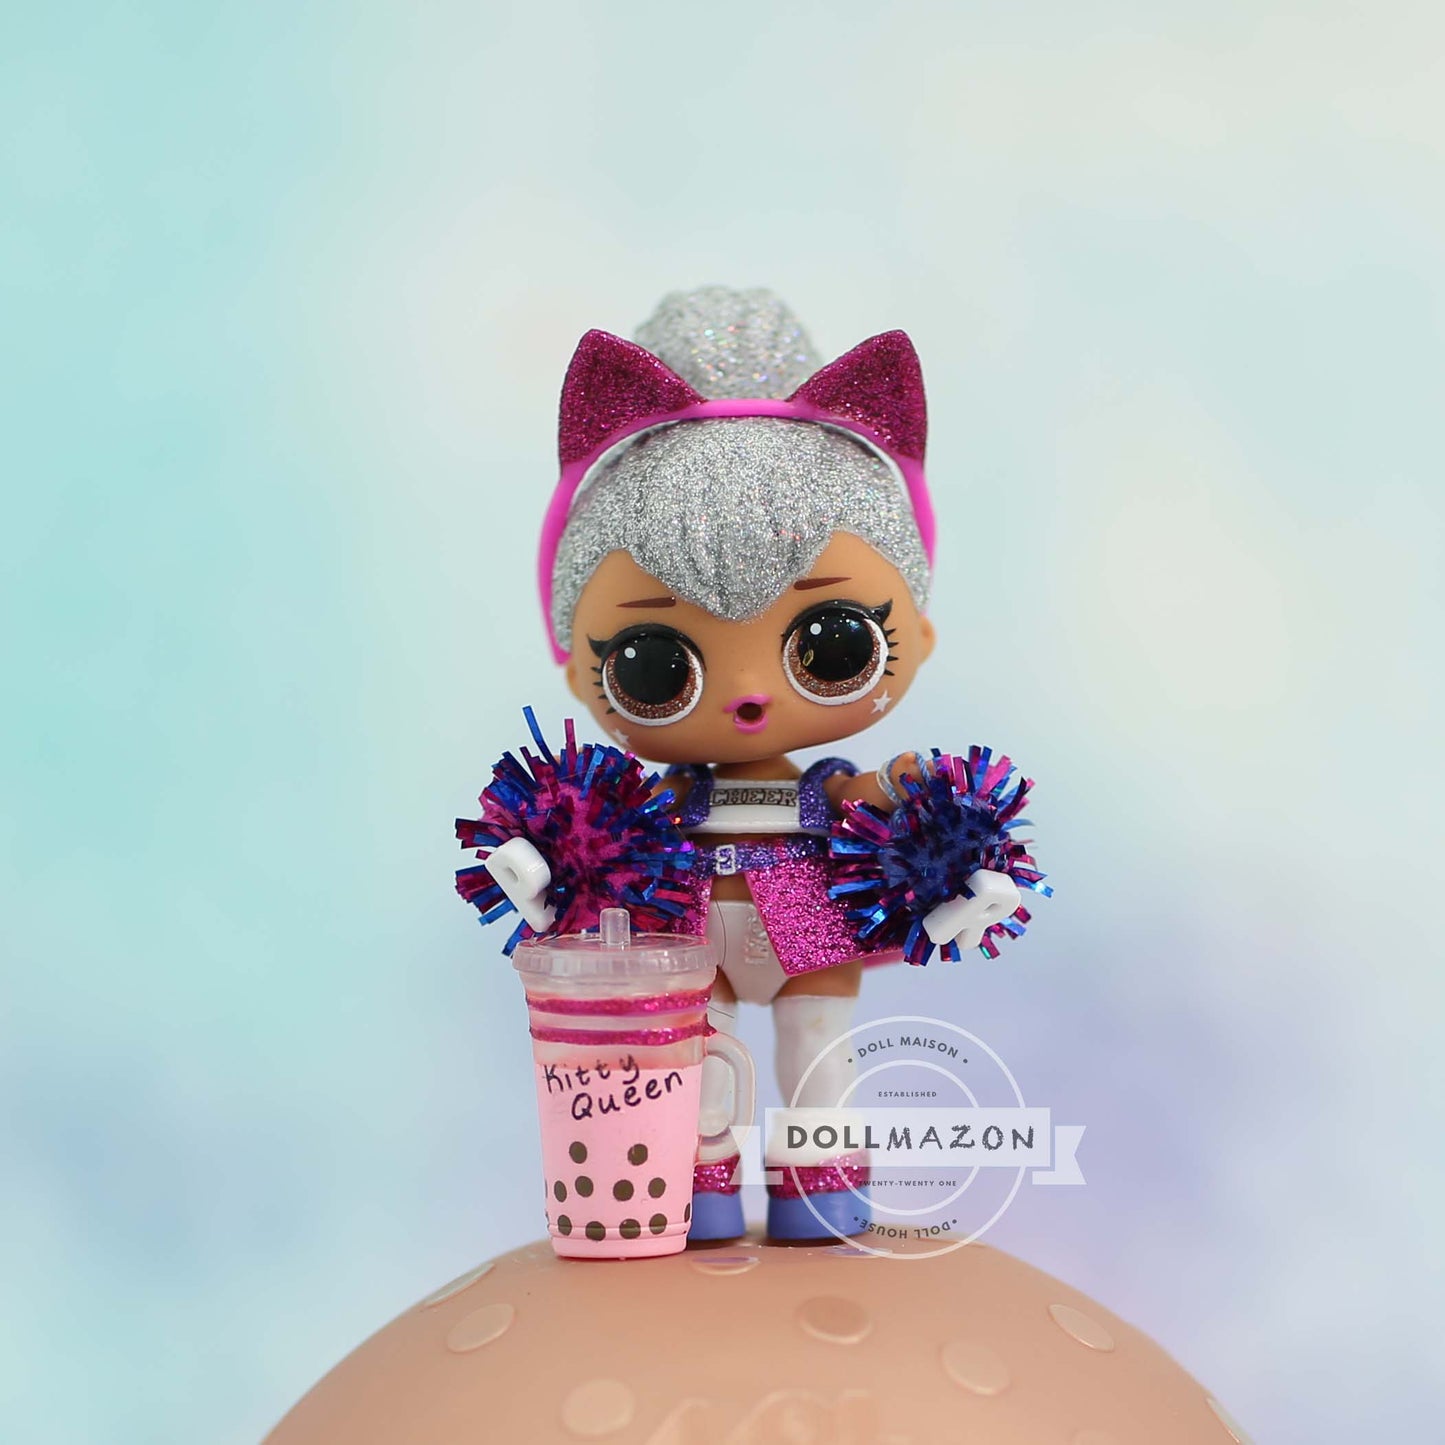 Kitty Queen LOL Surprise Doll All-Star B.B Cheer Cats (AS-204) Rare